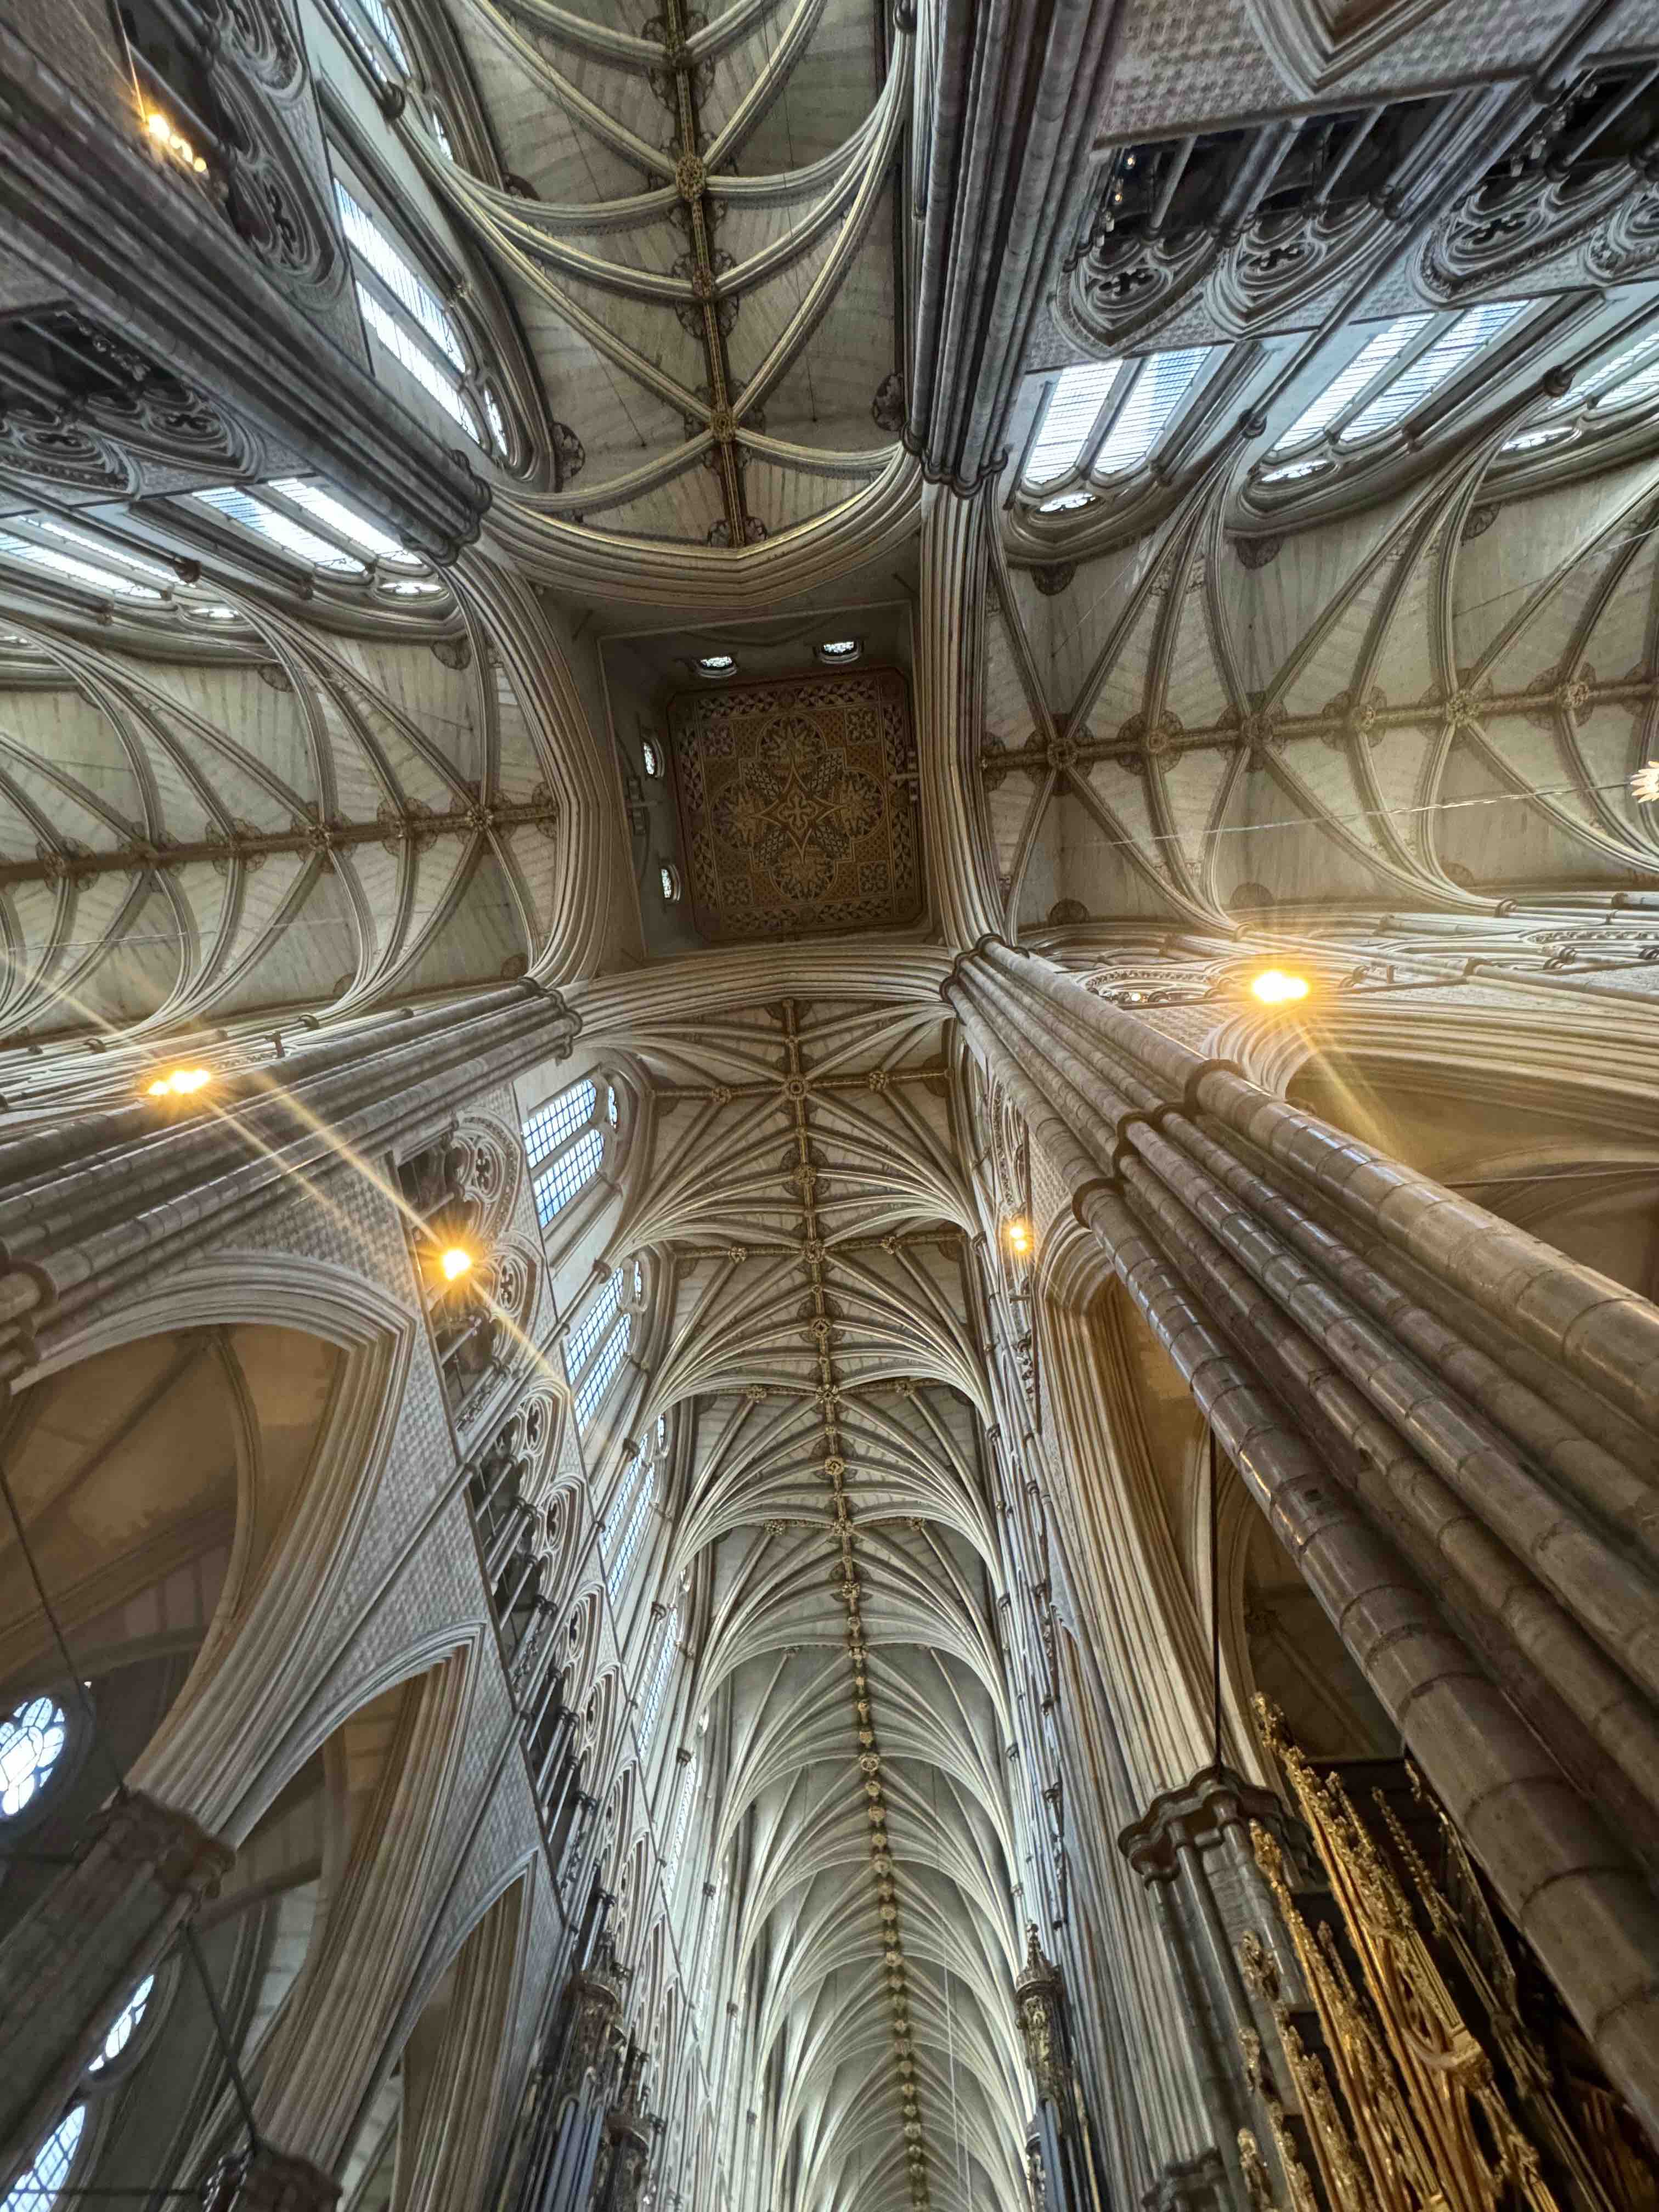 Ceiling of Westminster Abbey